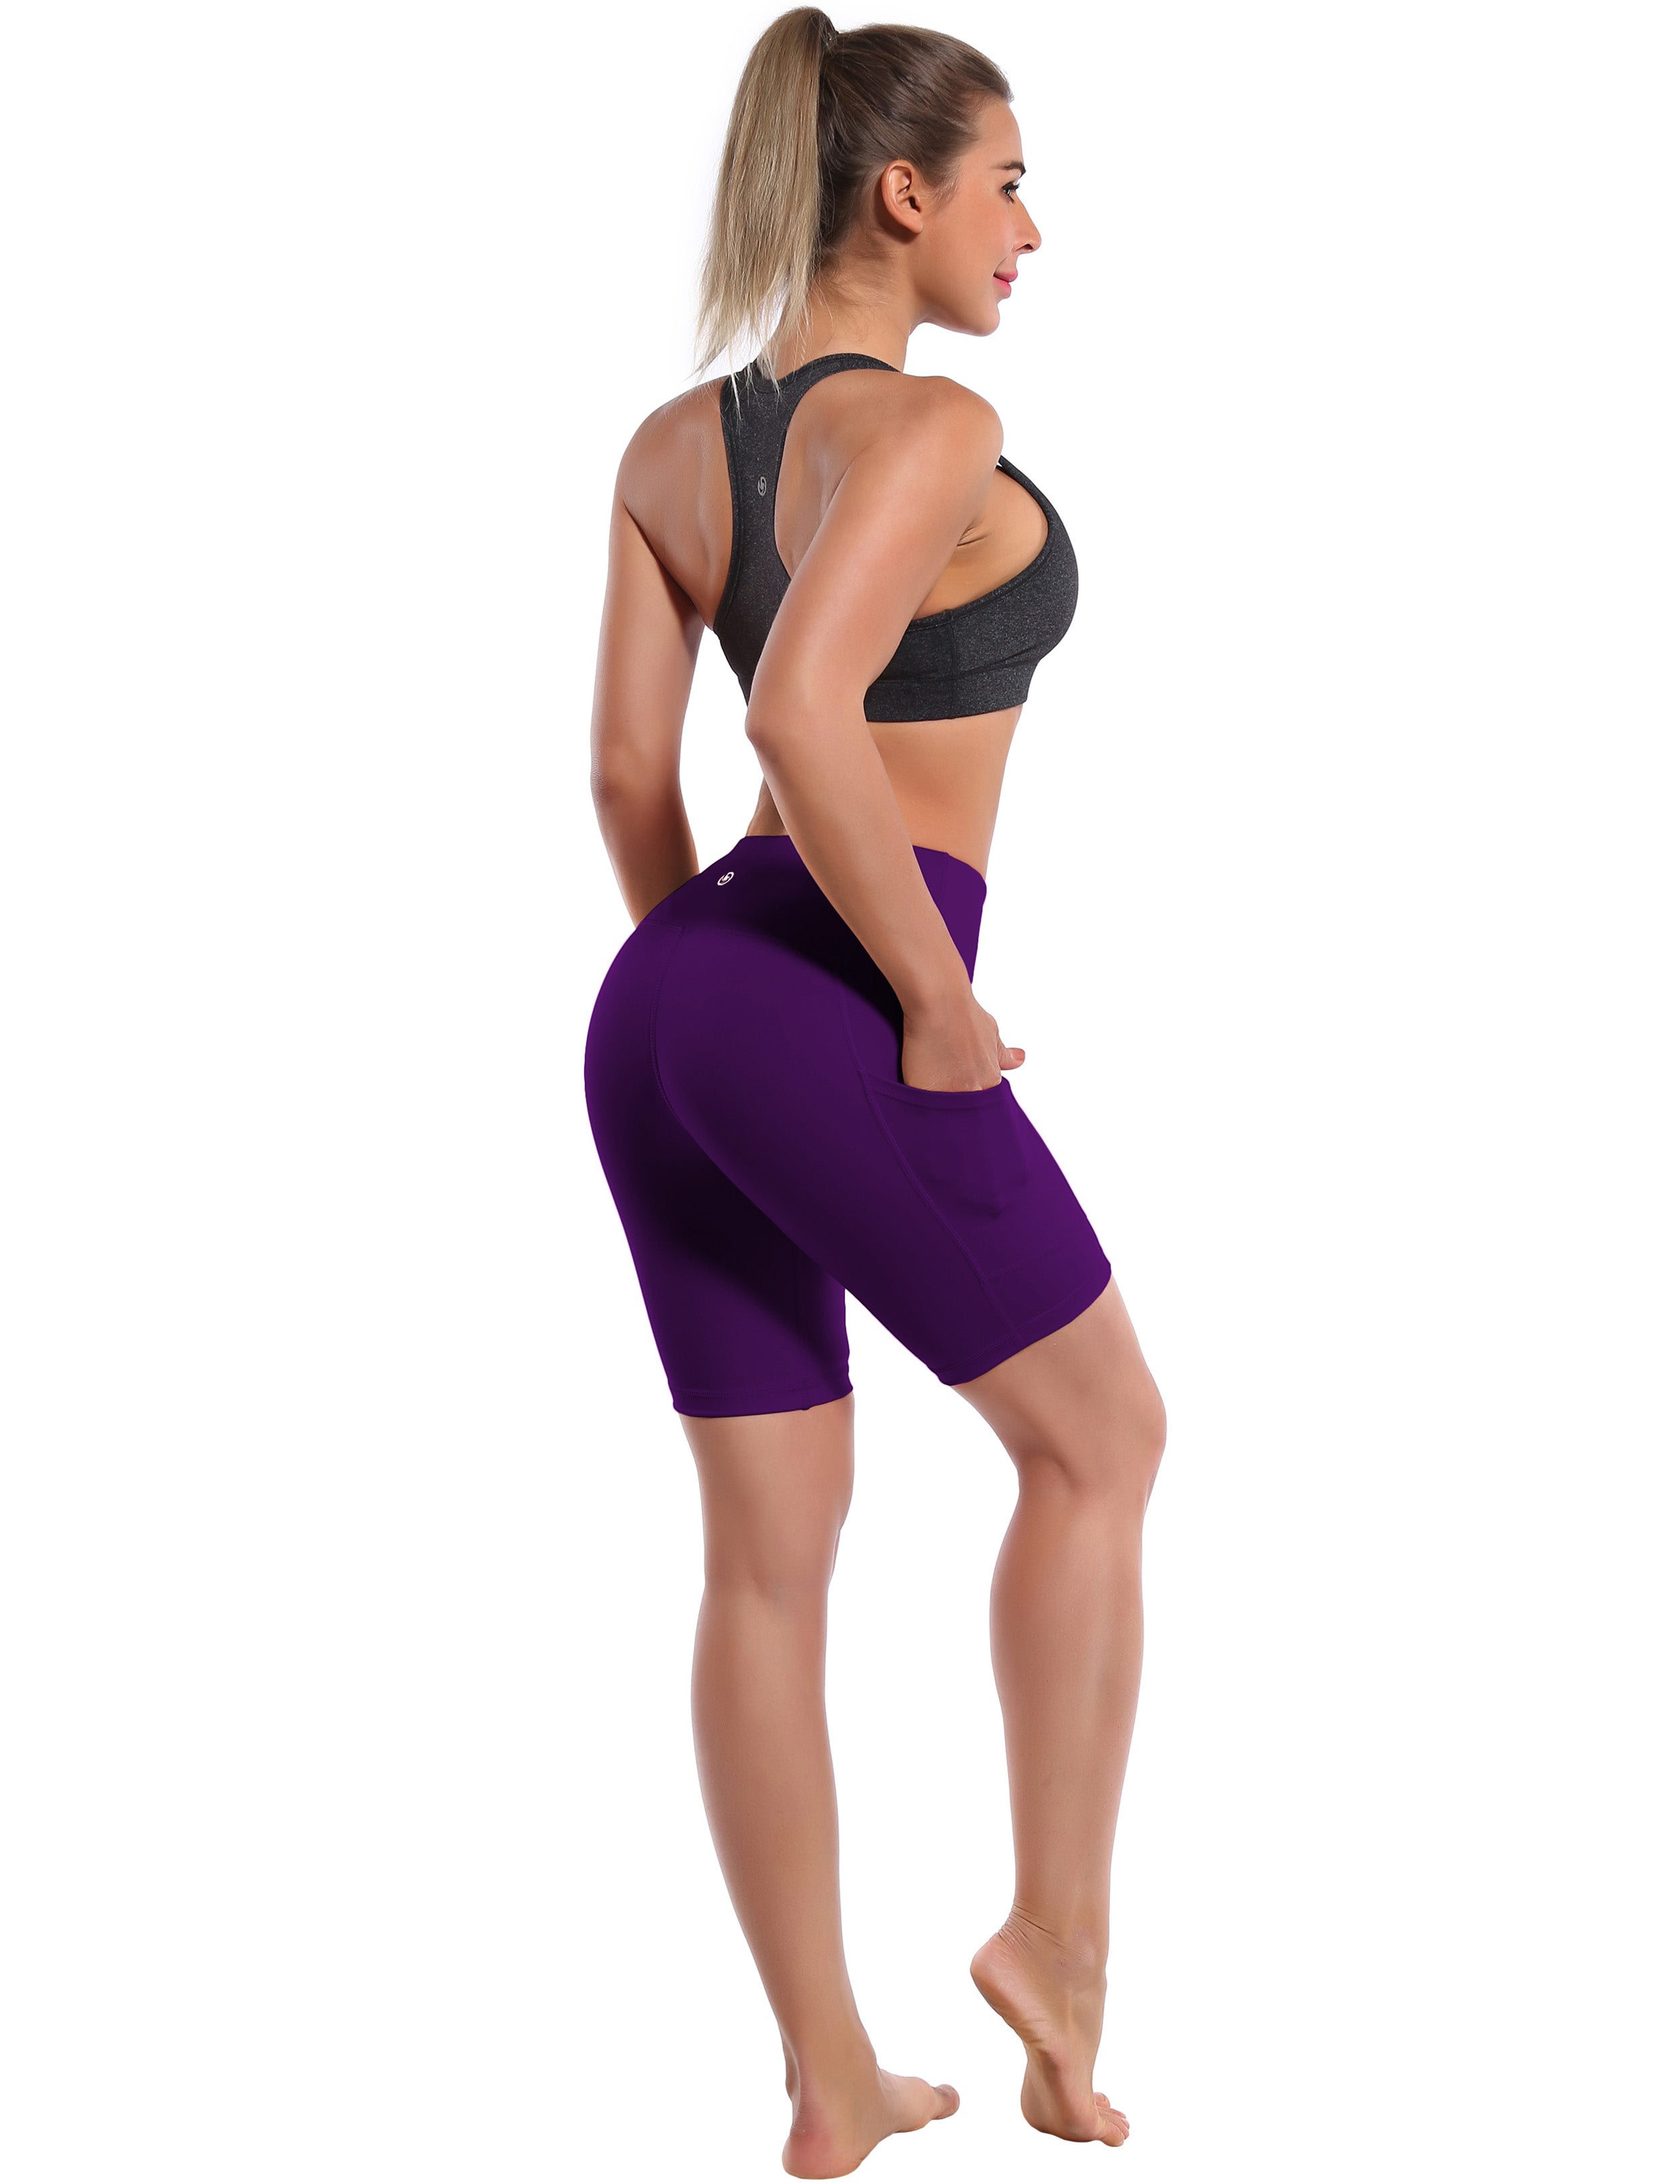 8" Side Pockets Pilates Shorts eggplantpurple Sleek, soft, smooth and totally comfortable: our newest style is here. Softest-ever fabric High elasticity High density 4-way stretch Fabric doesn't attract lint easily No see-through Moisture-wicking Machine wash 75% Nylon, 25% Spandex